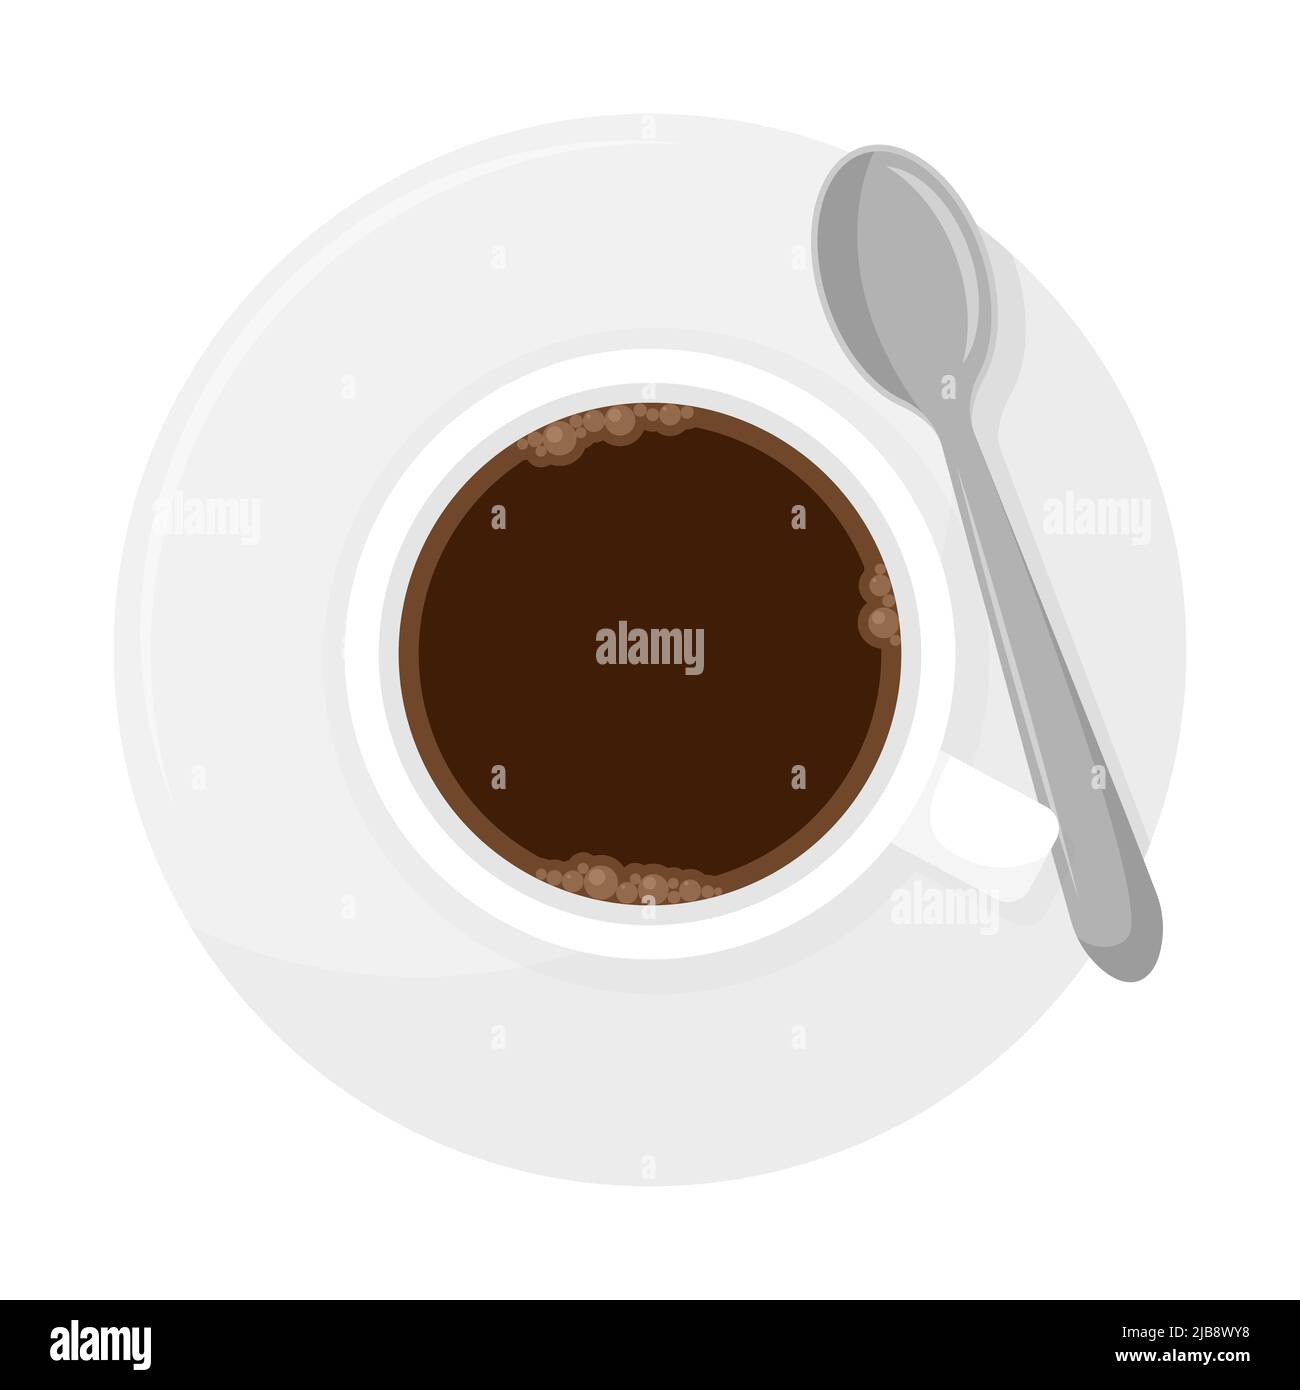 Ceramic mug of coffee or tea. Cup of hot drink on plate with spoon. Top view. Cartoon flat vector illustration isolated on white background. Stock Vector